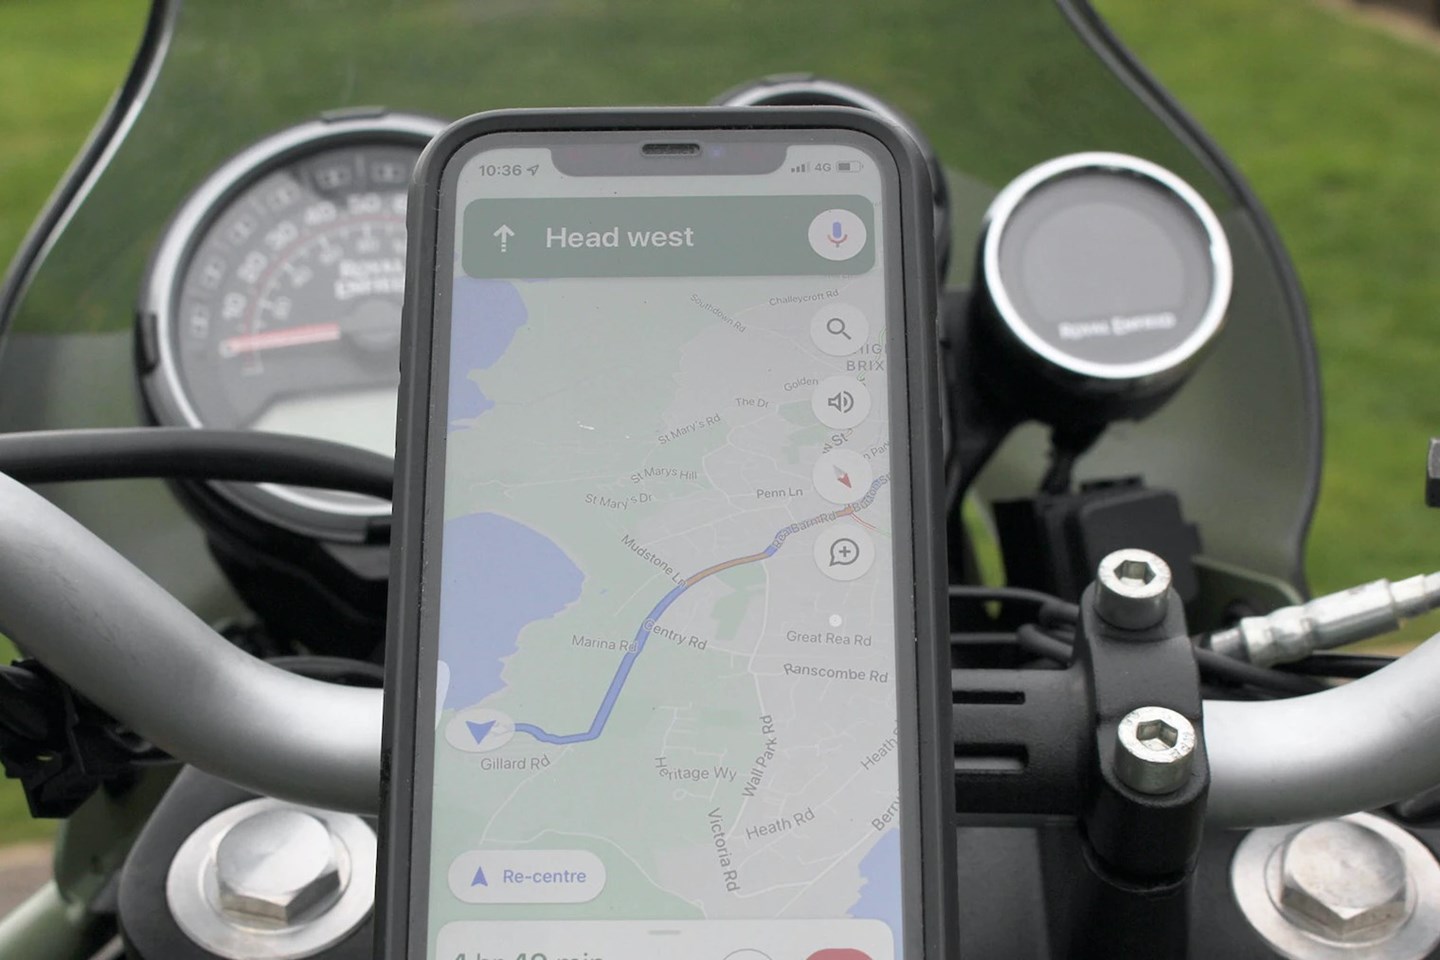 Sport motorcycle phone mount for smartphone and iPhone